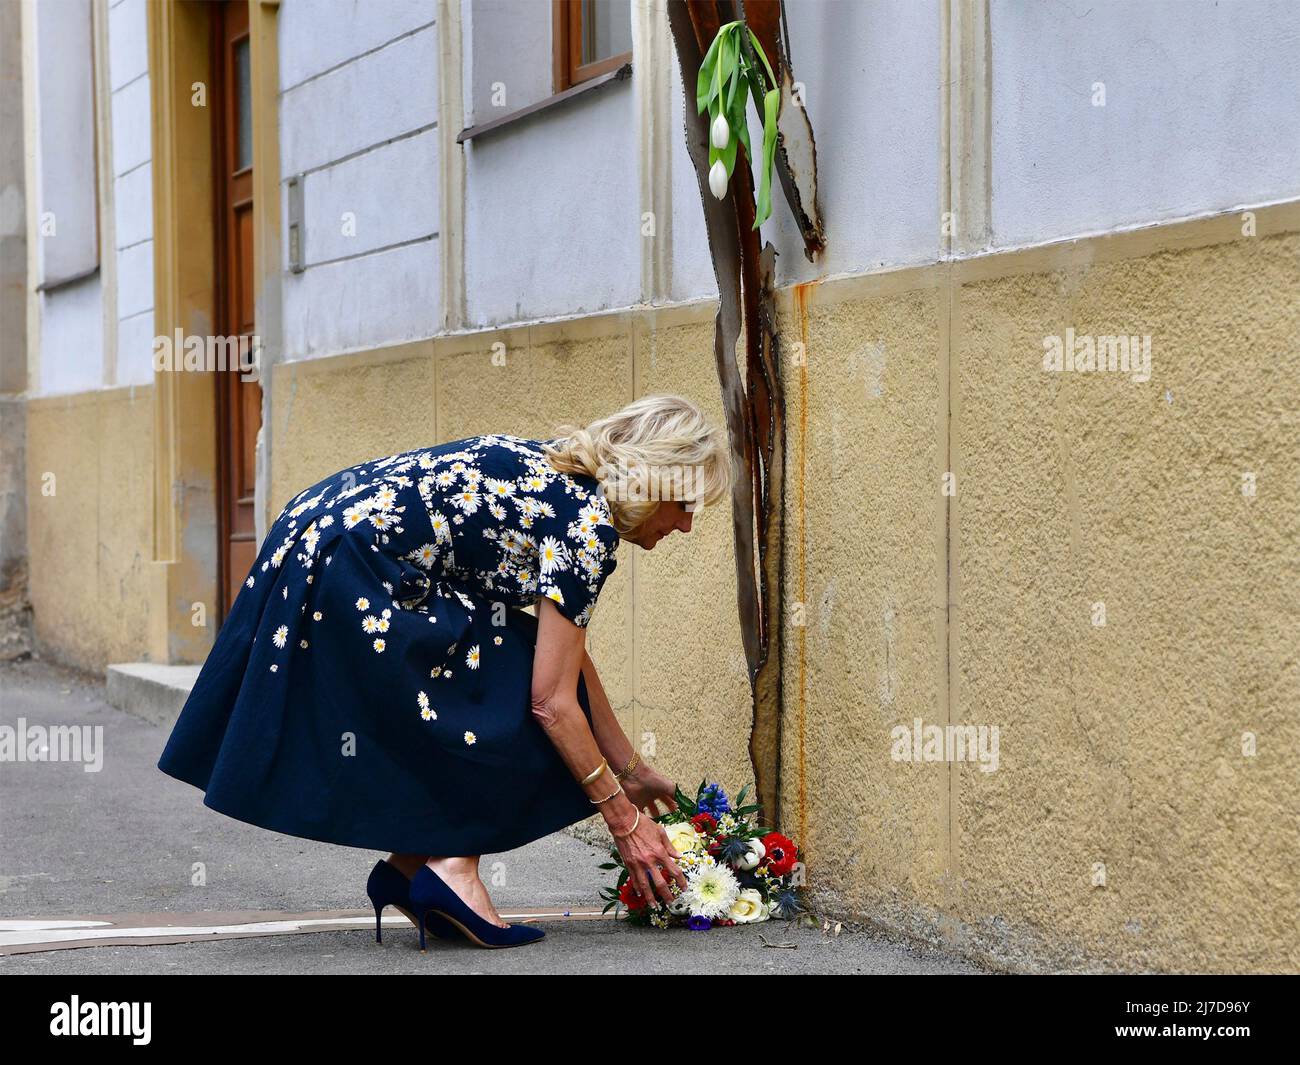 Bratislava, Slovakia. 07 May, 2022. U.S. First Lady Jill Biden, places flowers at memorial dedicated to Jan Kuciak, a 27-year-old journalist killed in his home after investigating government corruption, May 7, 2022 in Bratislava, Slovakia.  Credit: U.S. Embassy Slovakia/State Department/Alamy Live News Stock Photo